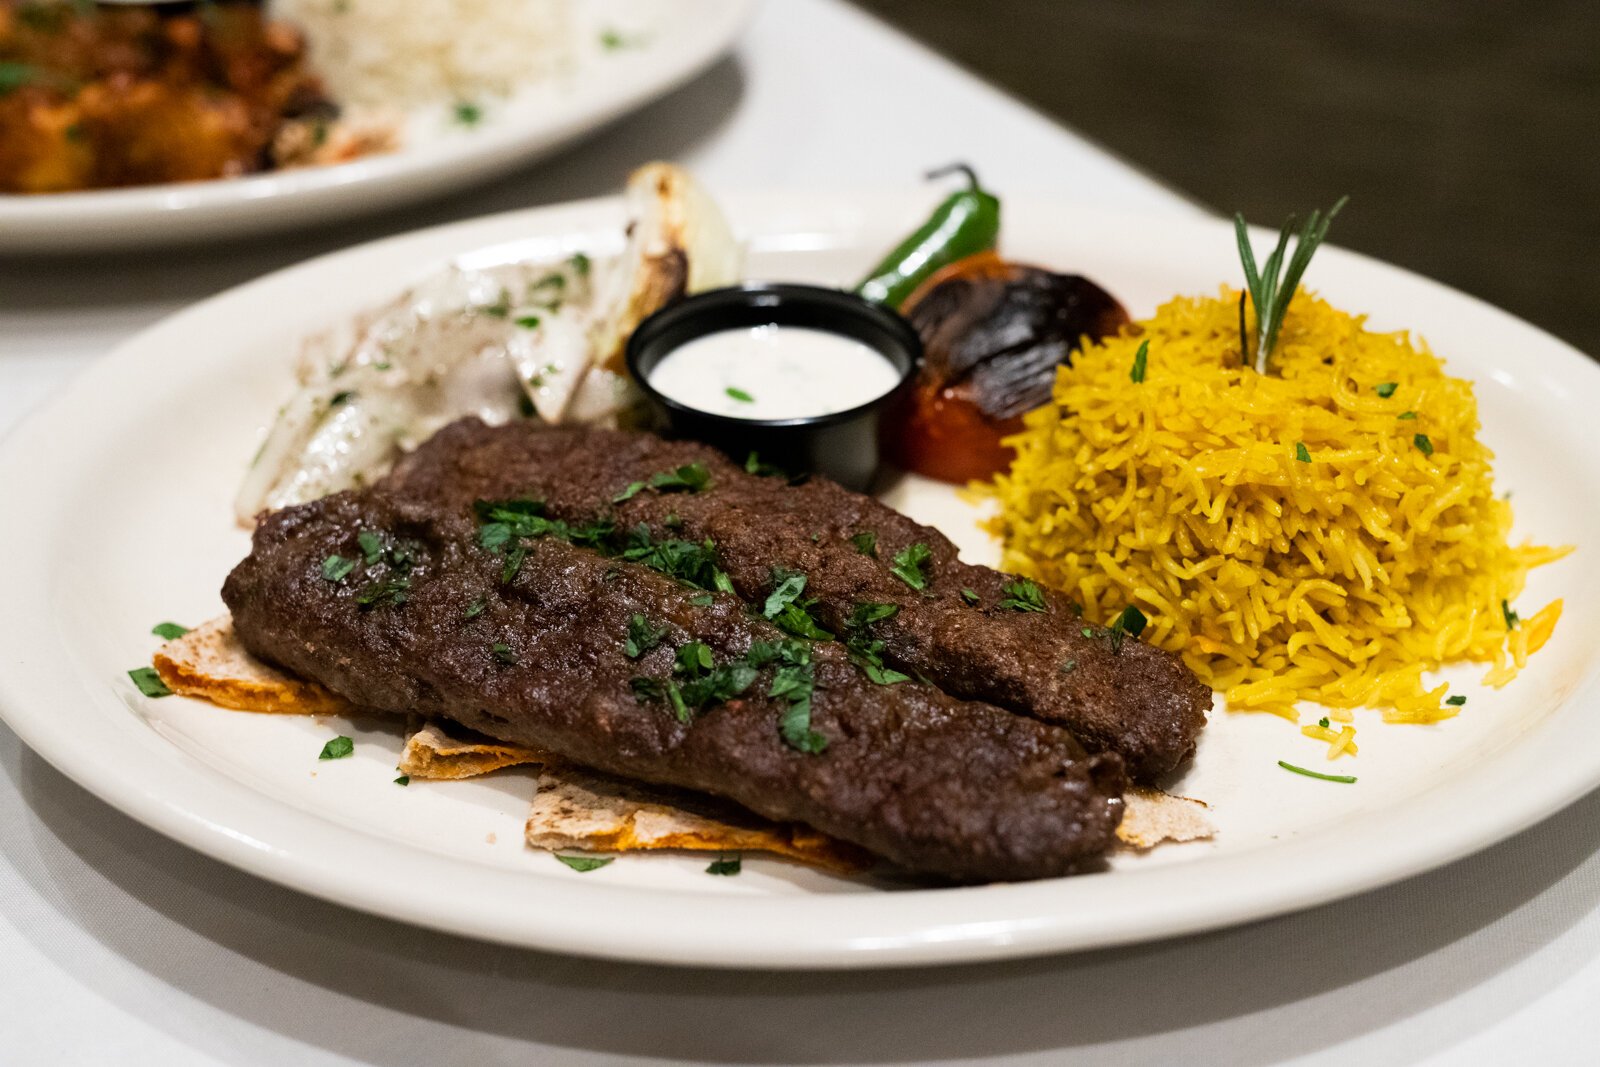 The Adana Beef Kebab is incredibly savory, tender, and well-spiced. It plays nicely with the nutty, slightly bitter tahini sauce it’s served with.